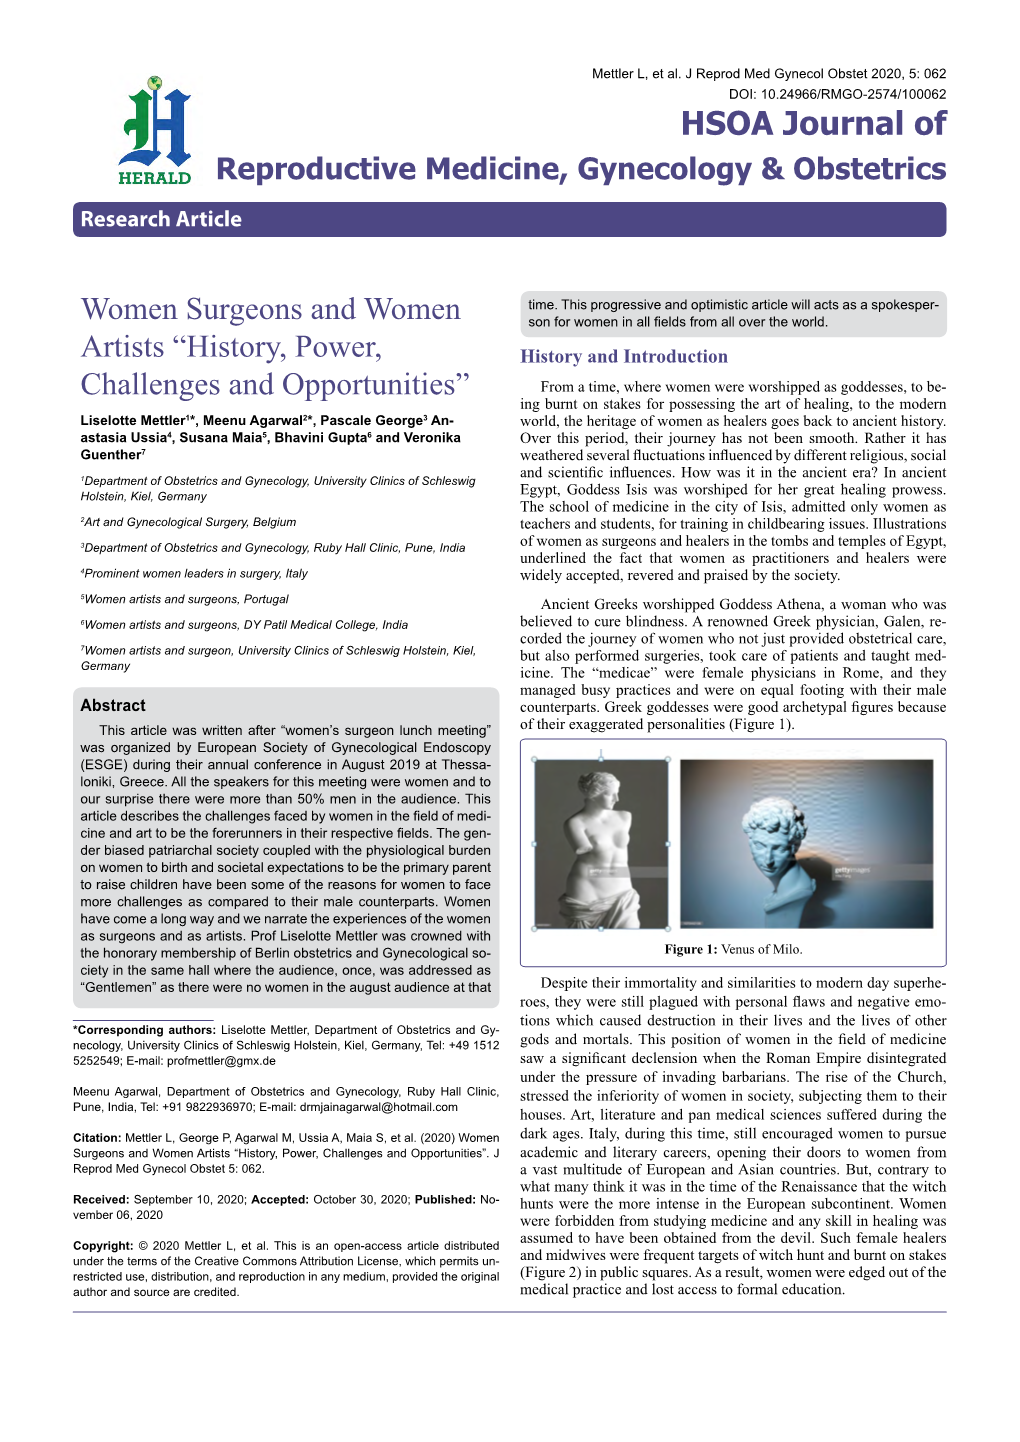 Women Surgeons and Women Artists “History, Power, Challenges and Opportunities”